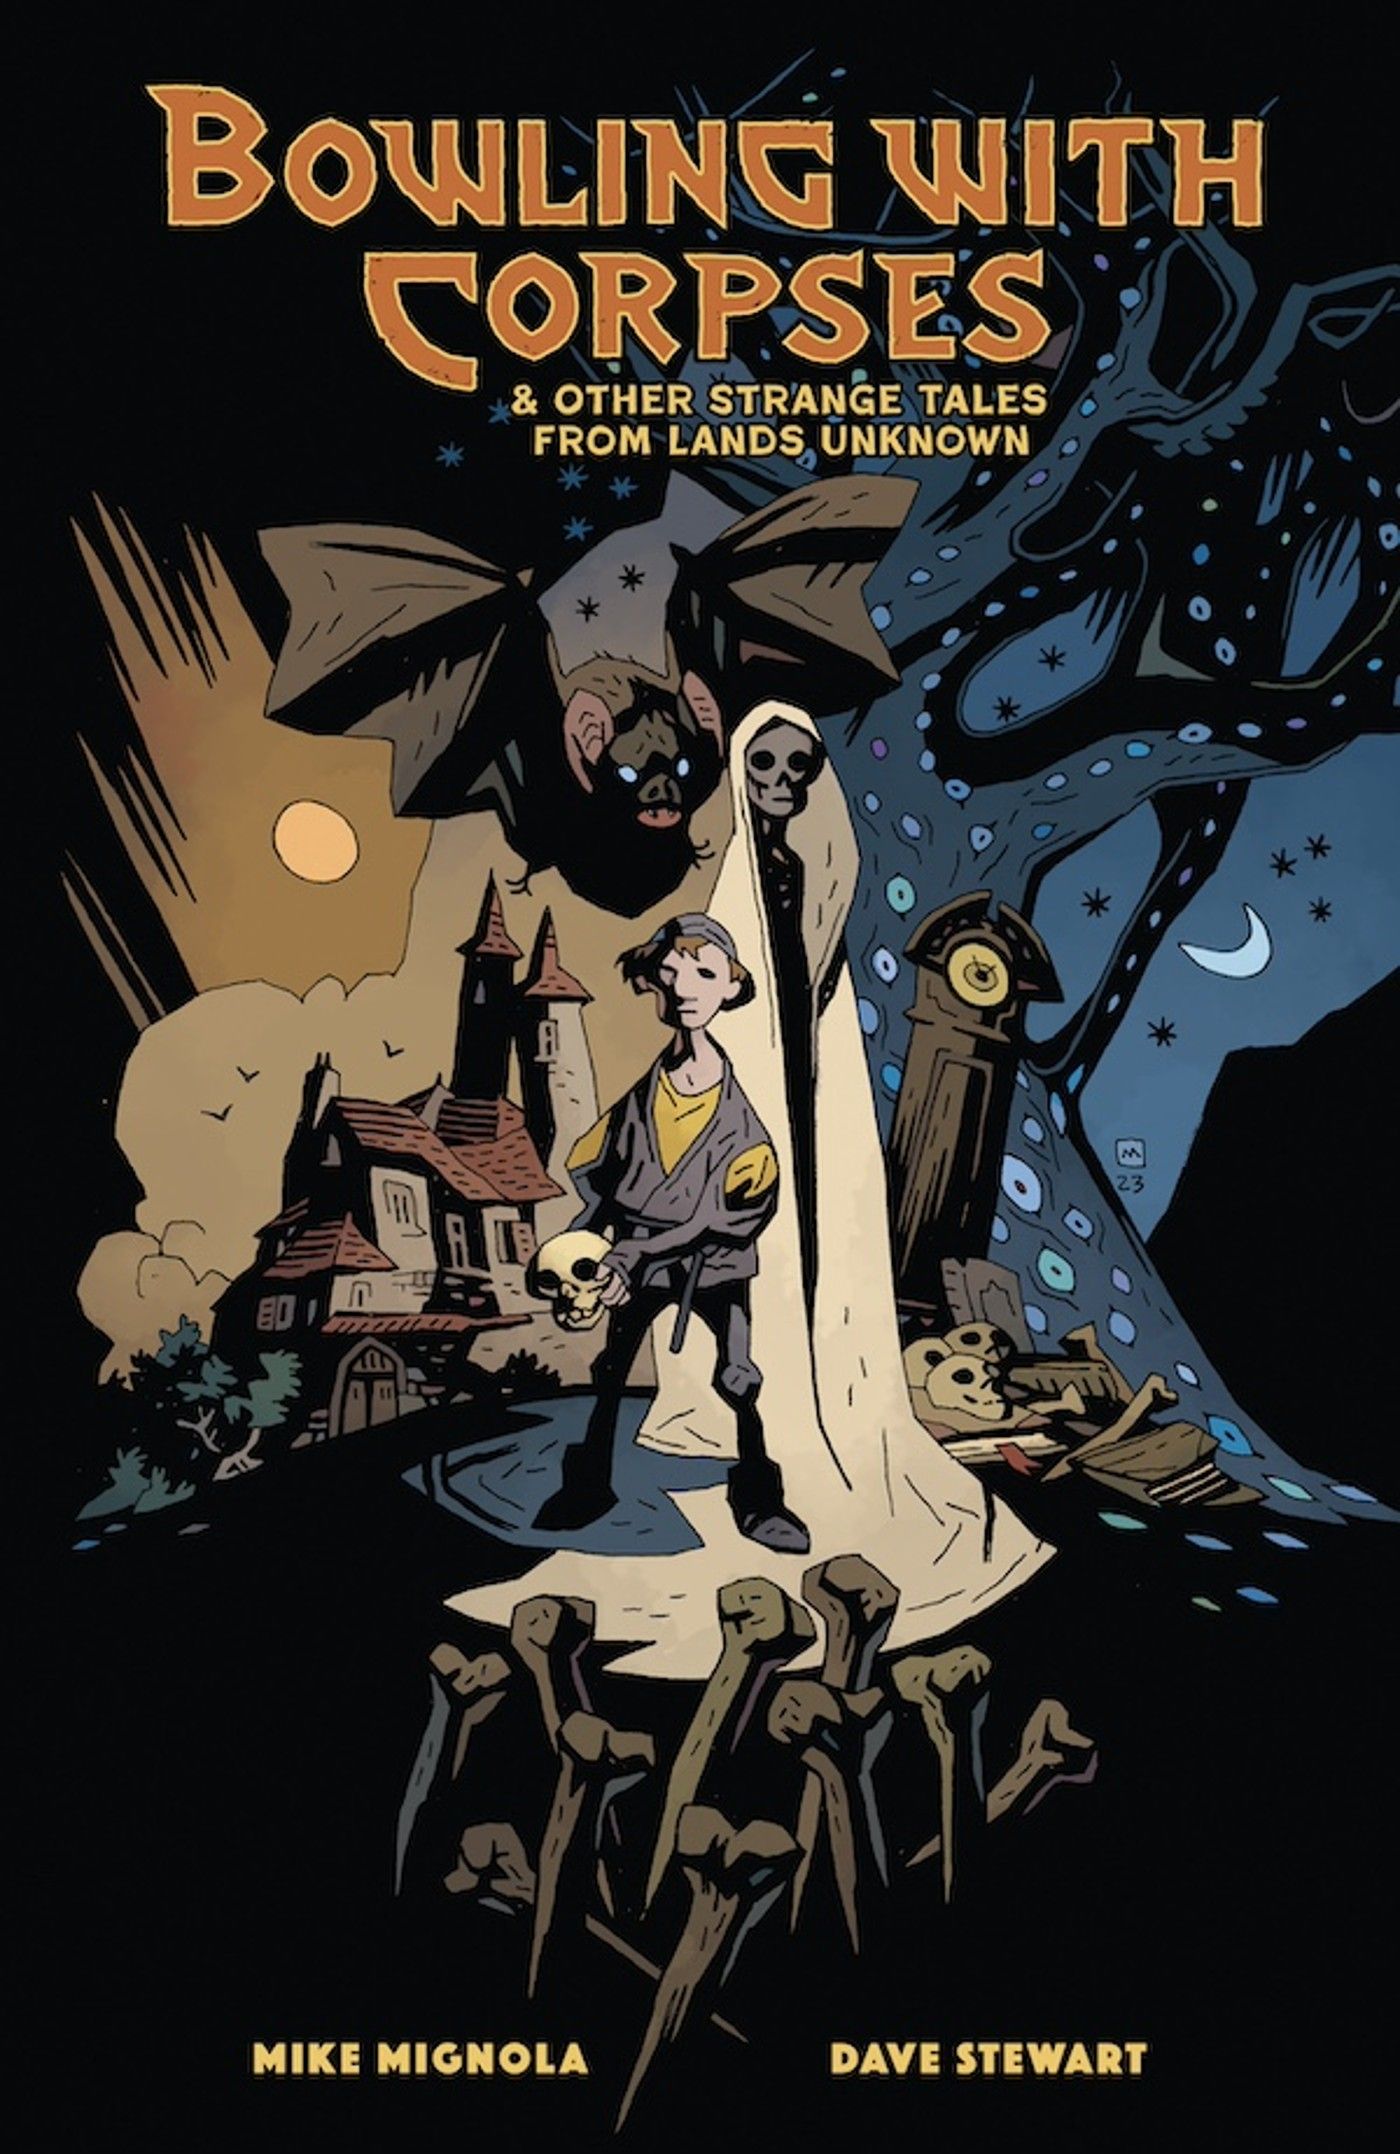 “Bowling With Corpses”: Hellboy Creator Mike Mignola Launches an All-New Shared Universe